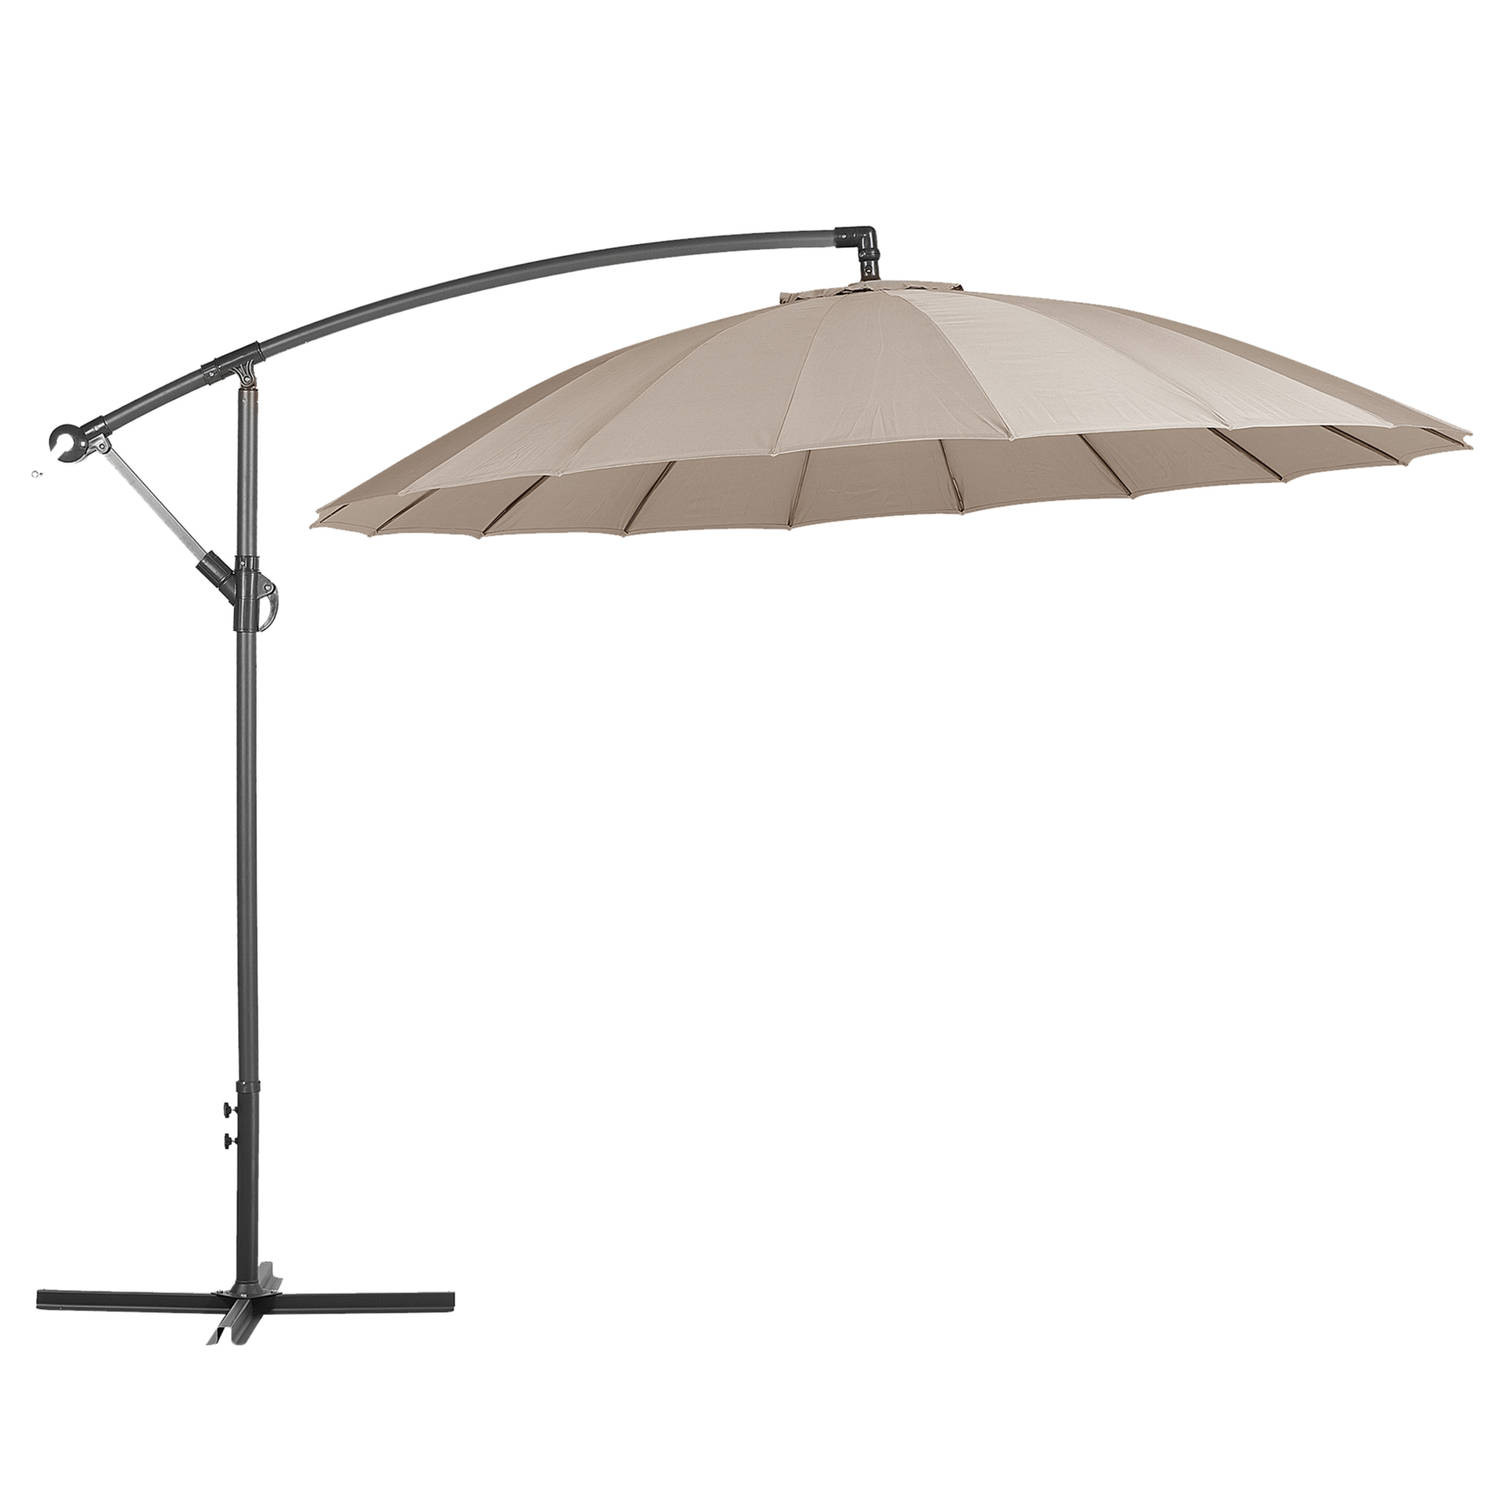 Beliani CALABRIA - Cantilever parasol-Beige-Polyester